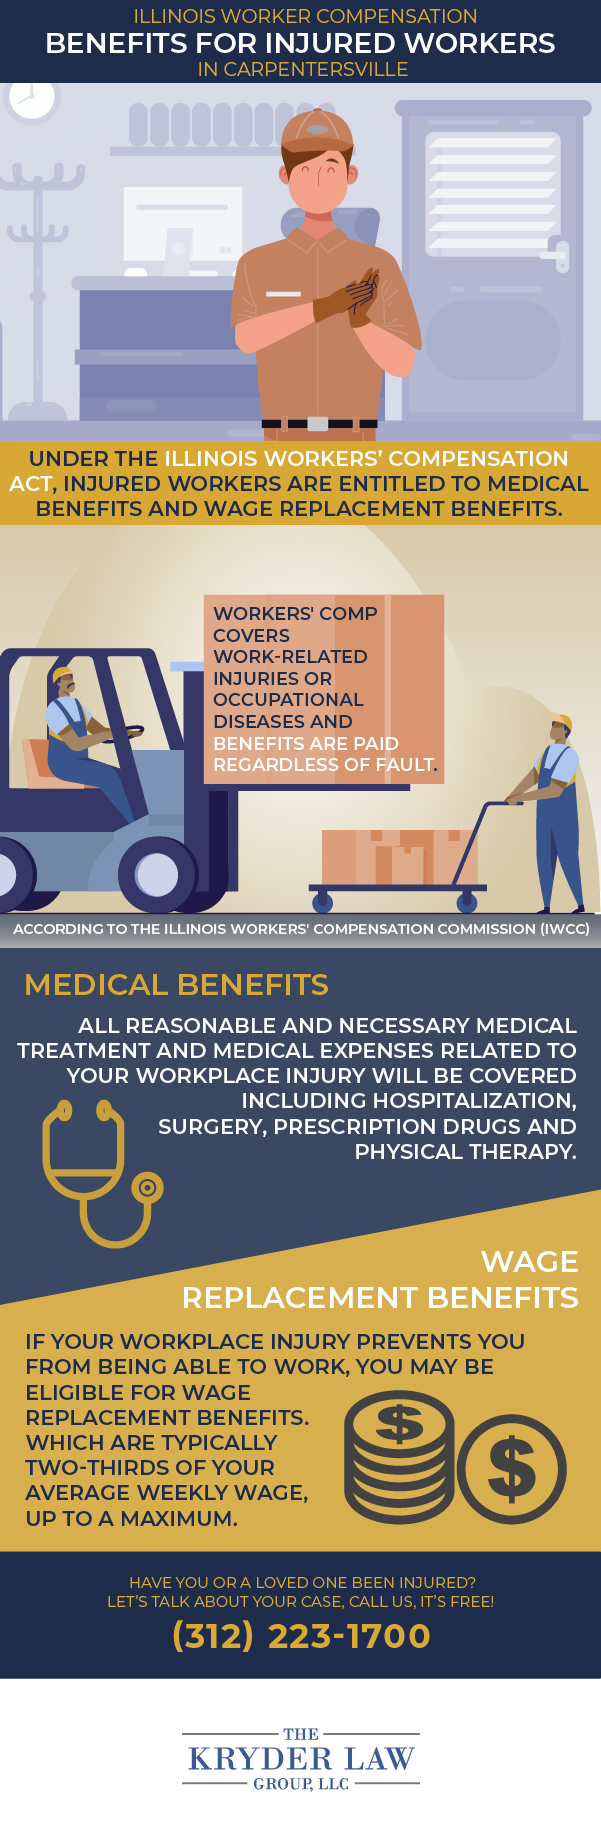 The Benefits of Hiring a Carpentersville Workers' Compensation Lawyer Infographic